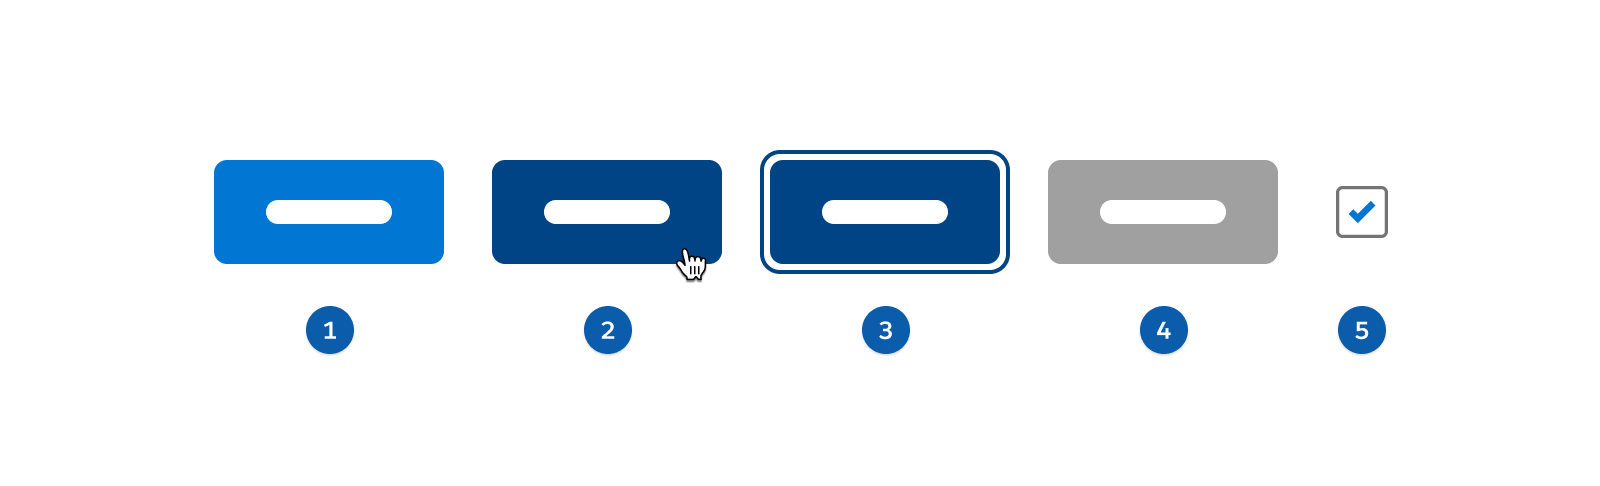 A graphic showing various button states, illustrating how colors give users feedback by visually informing them of the various actions they’re taking. This image shows default (1), hover (2), focus (3), disabled (4), and selected (5) states.